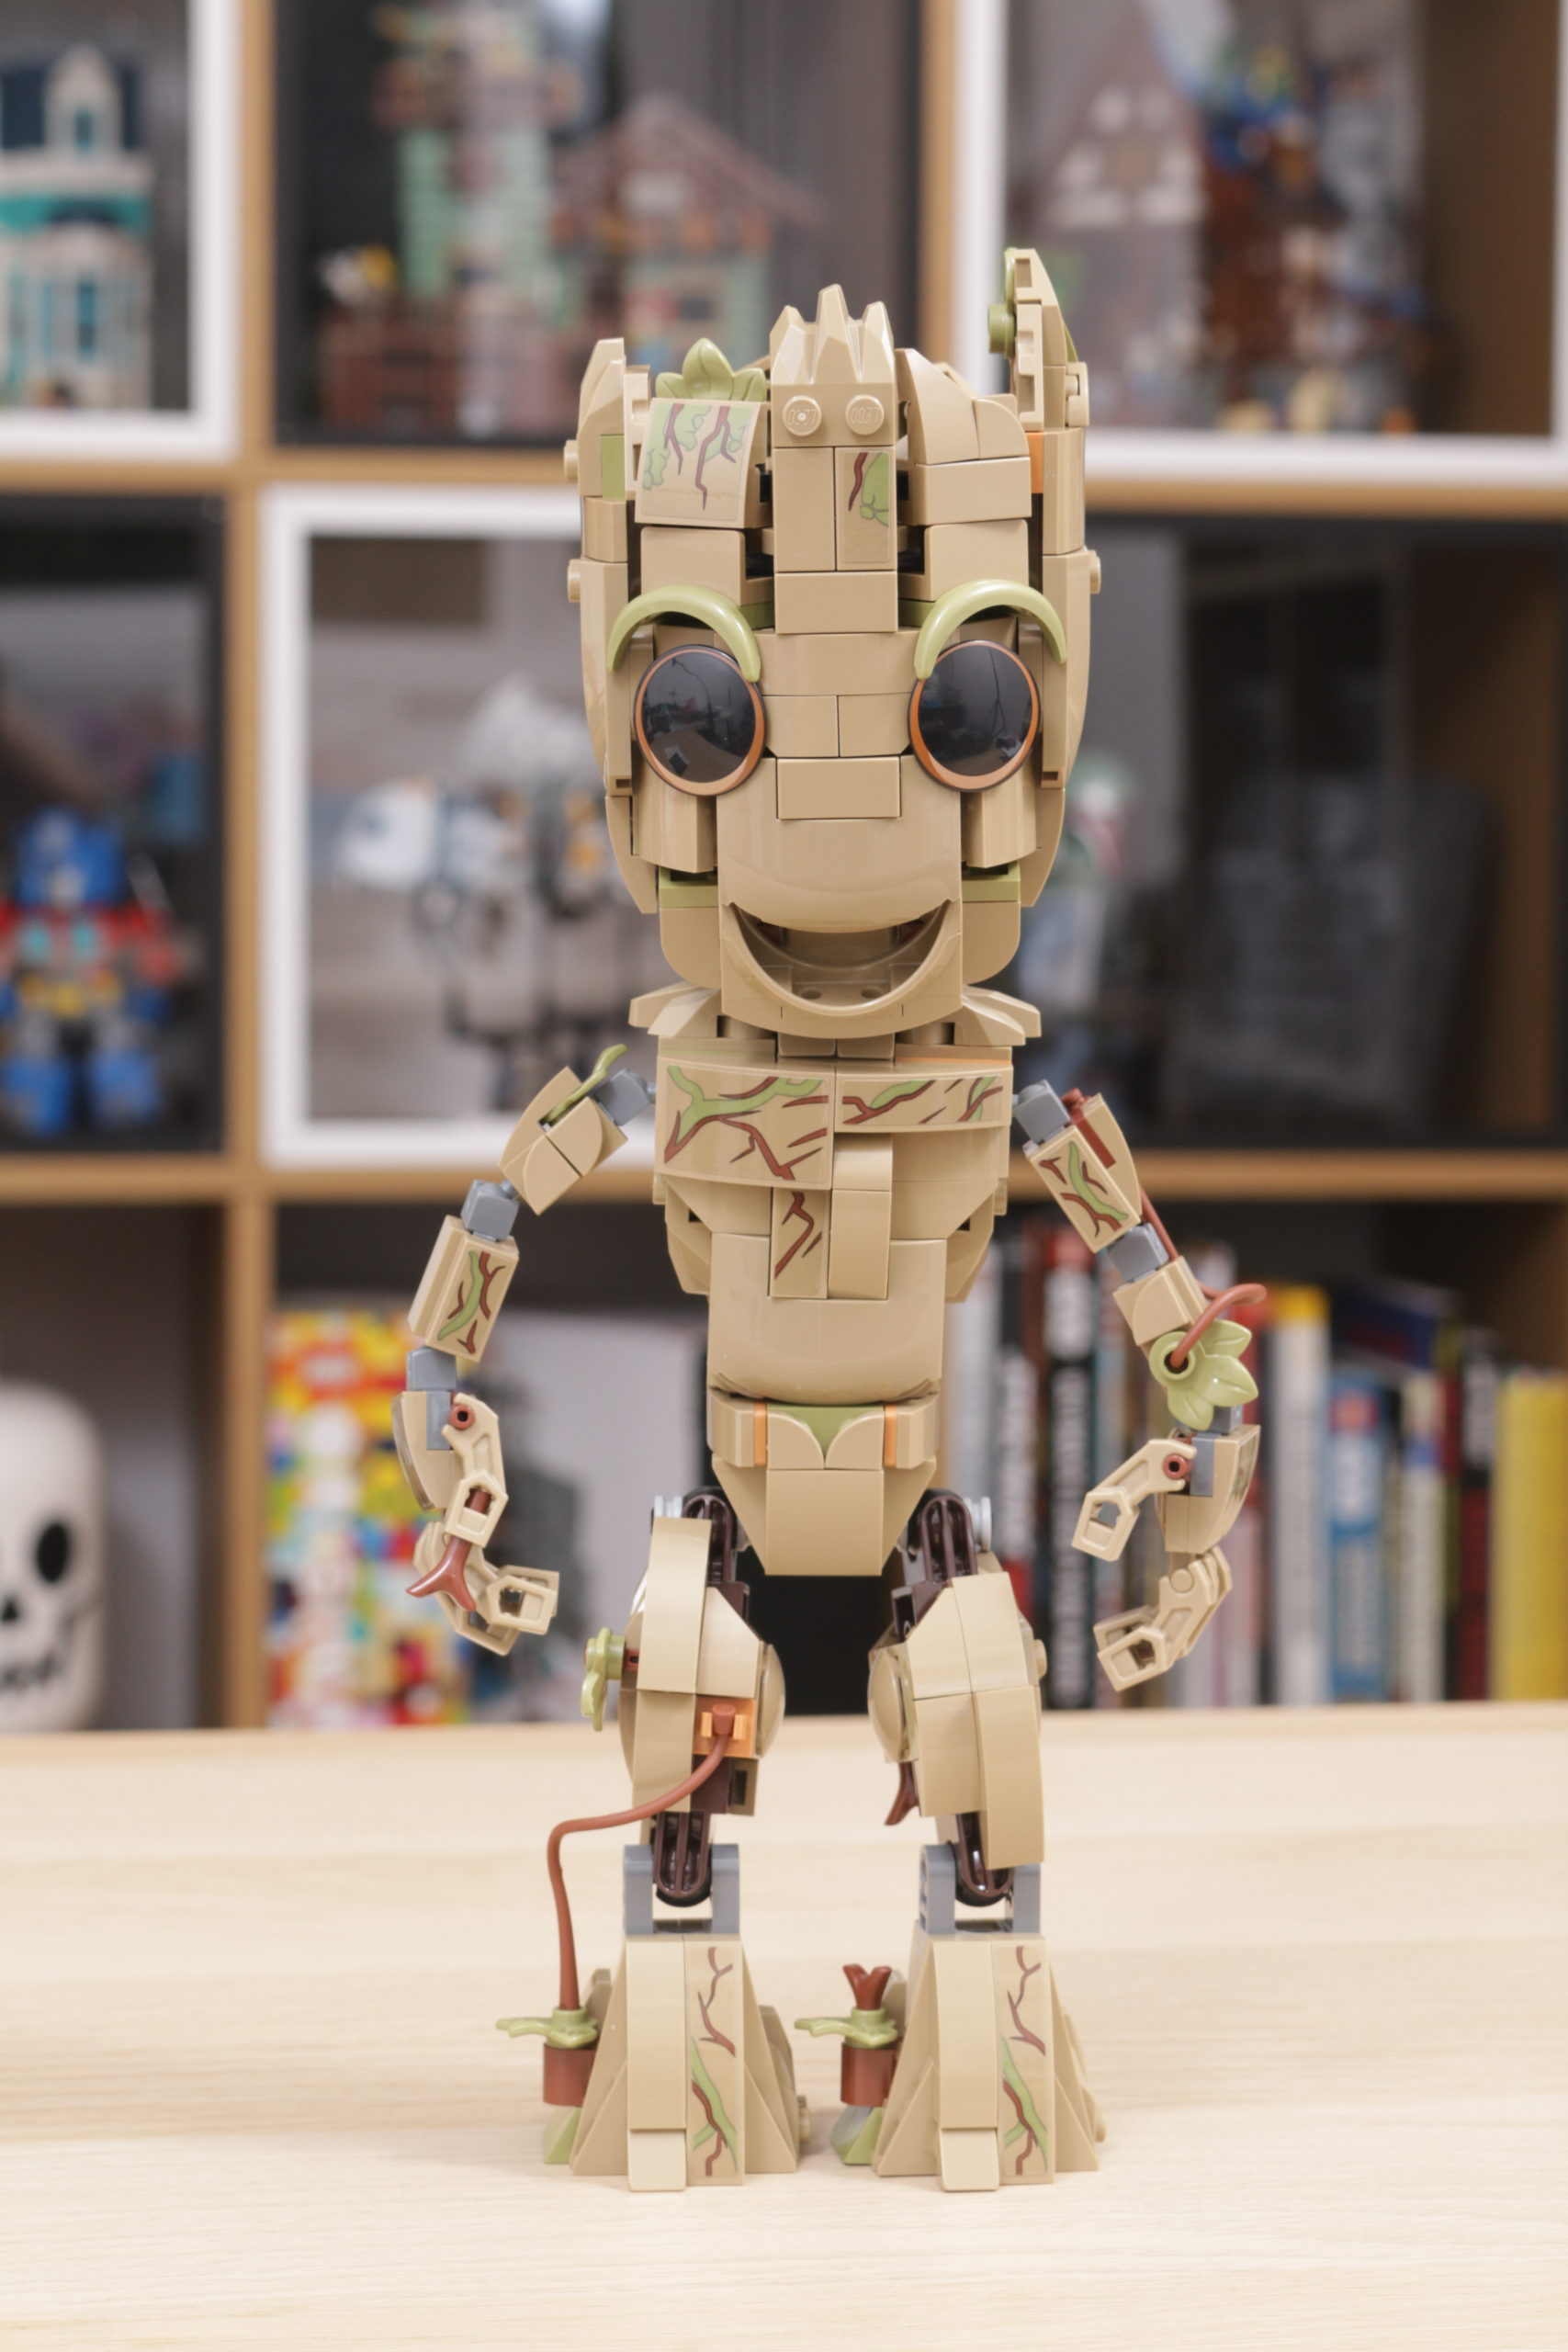 LEGO Marvel 76217 I am Groot review and gallery – I am Groot